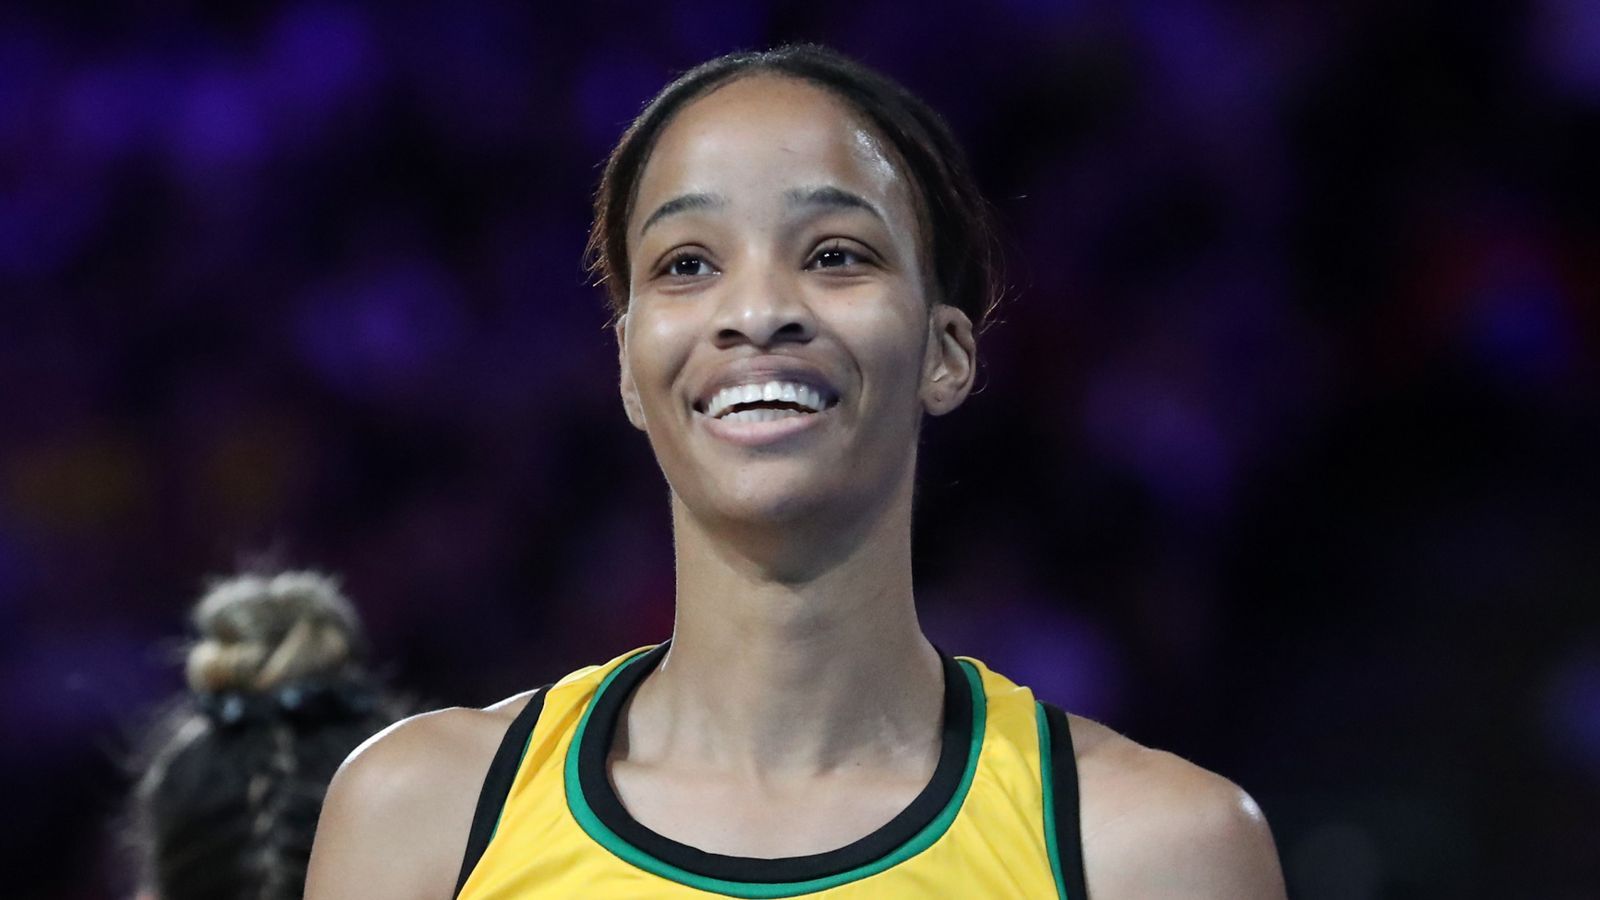 Commonwealth Games: Jamaica dominate New Zealand to reach first major final